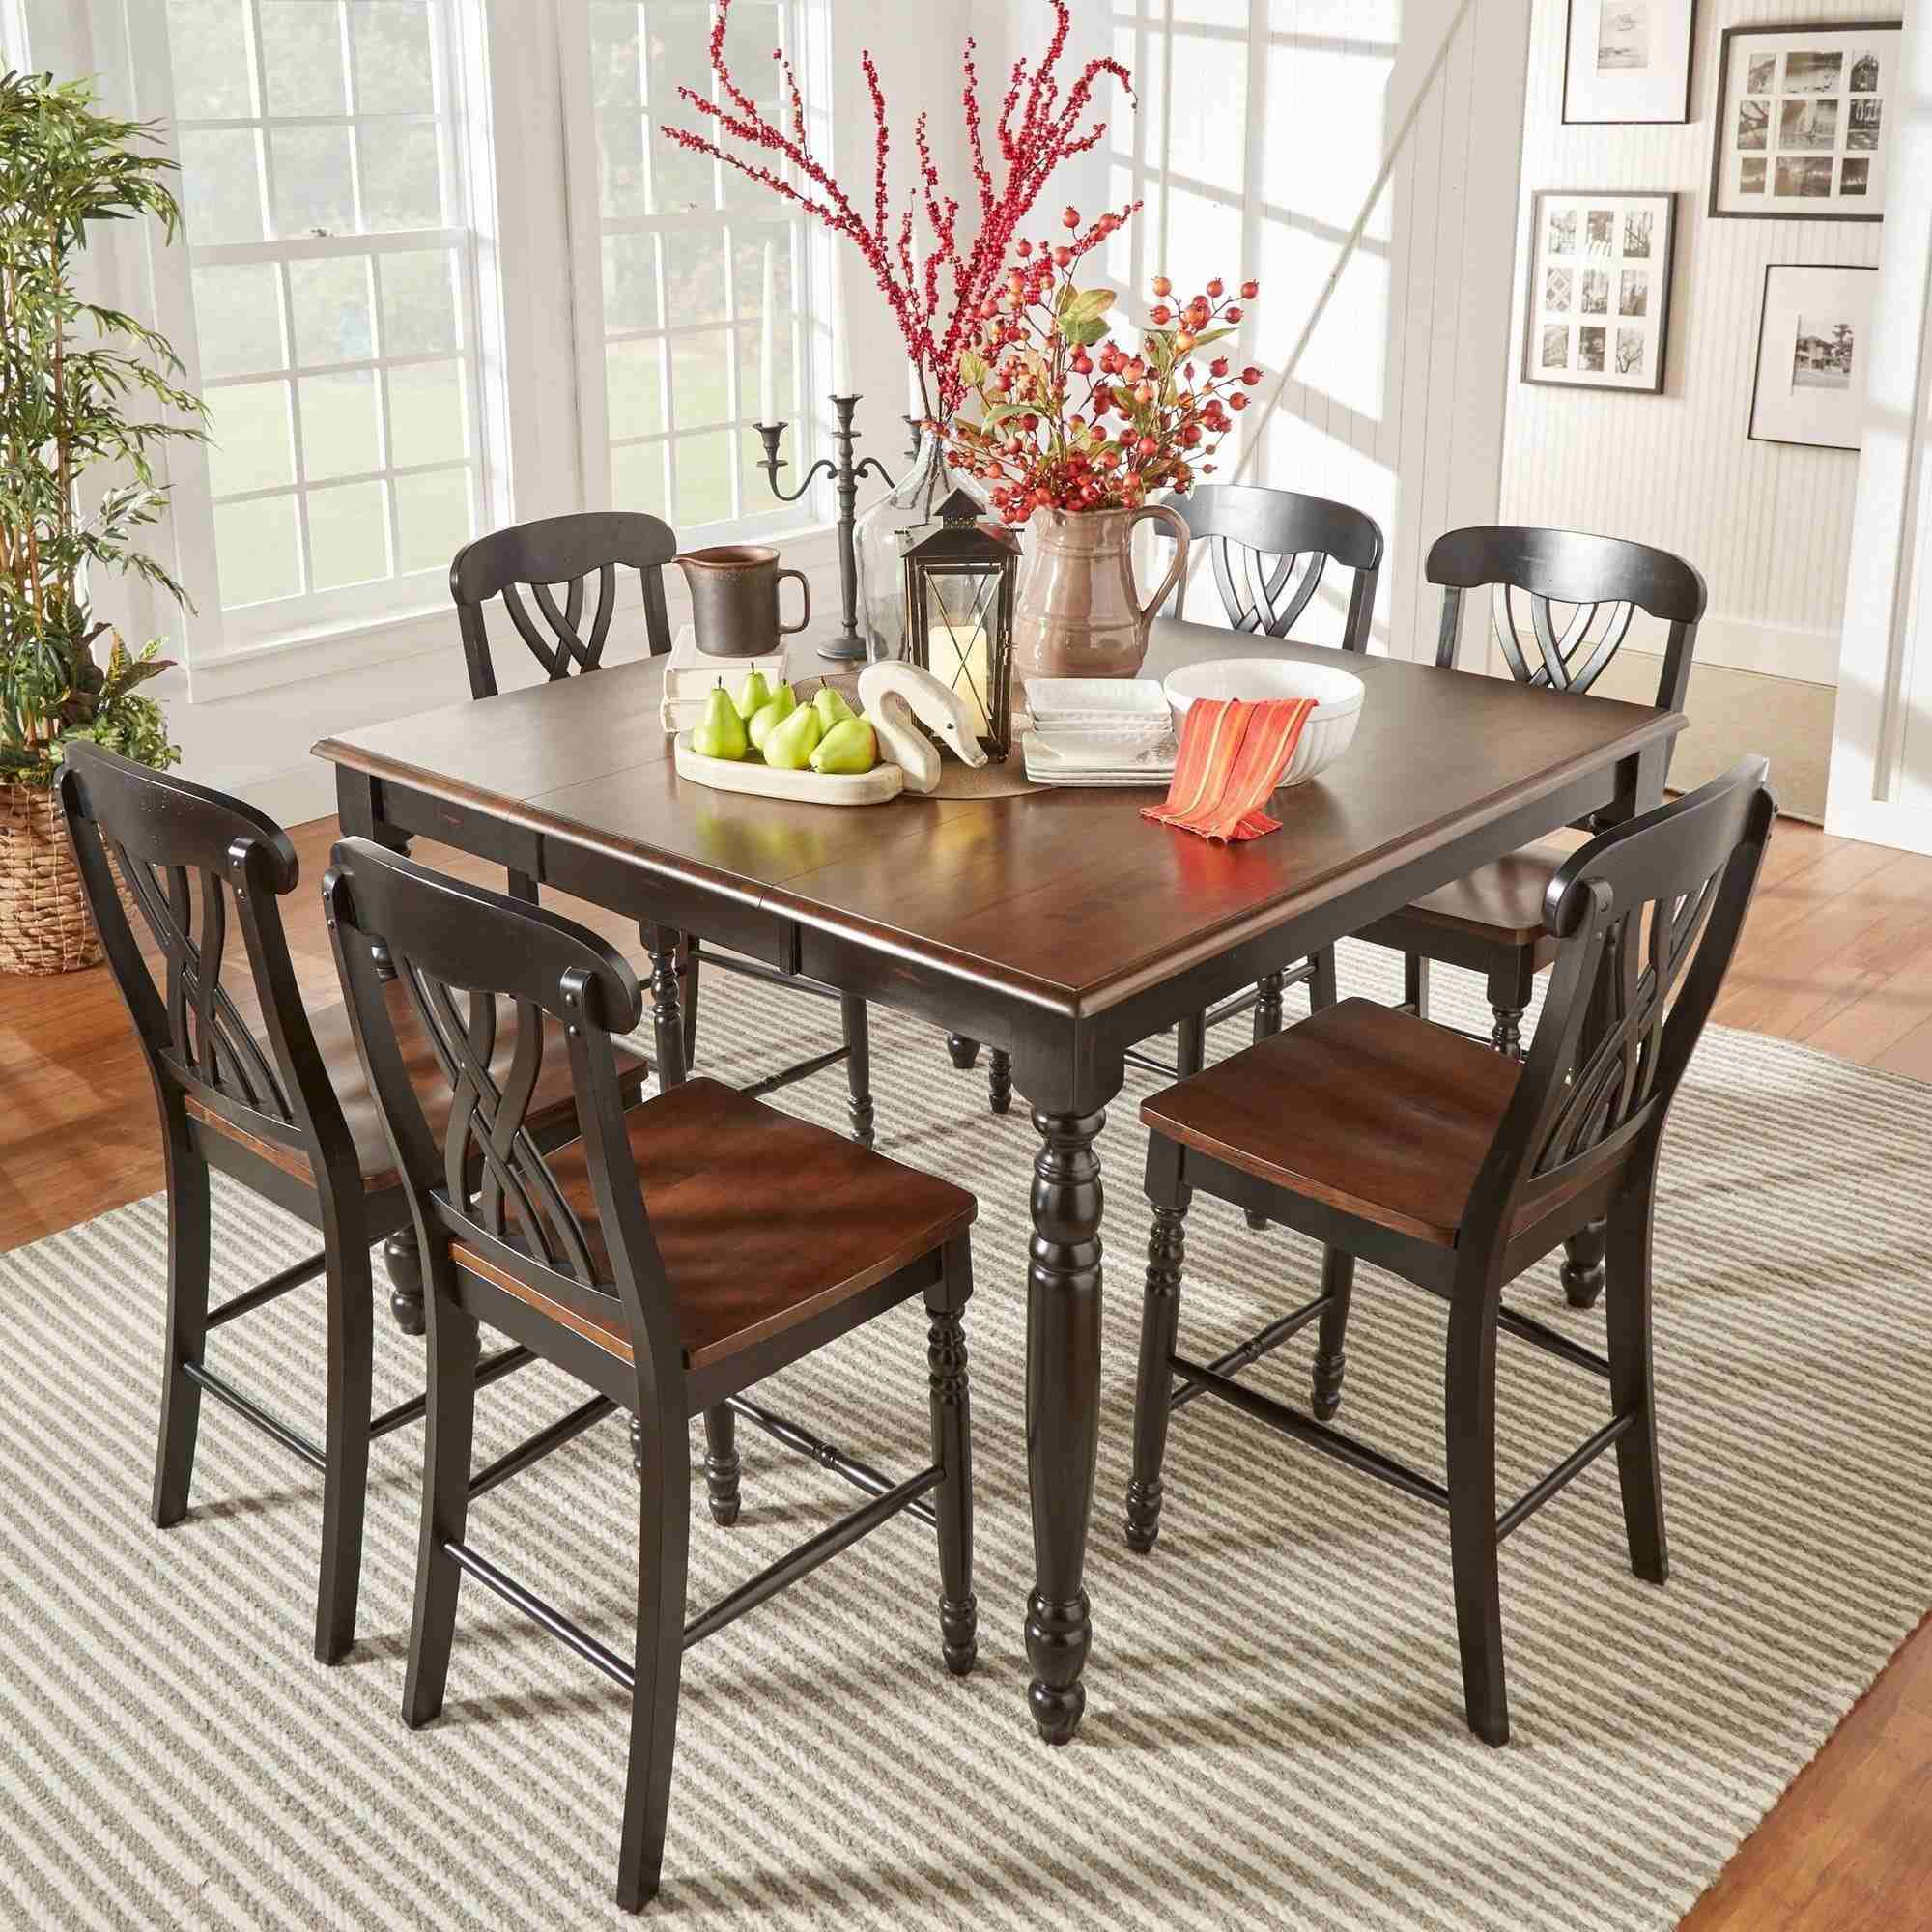 Kijiji Calgary Dining Room Table And Chairs • Faucet Ideas Site